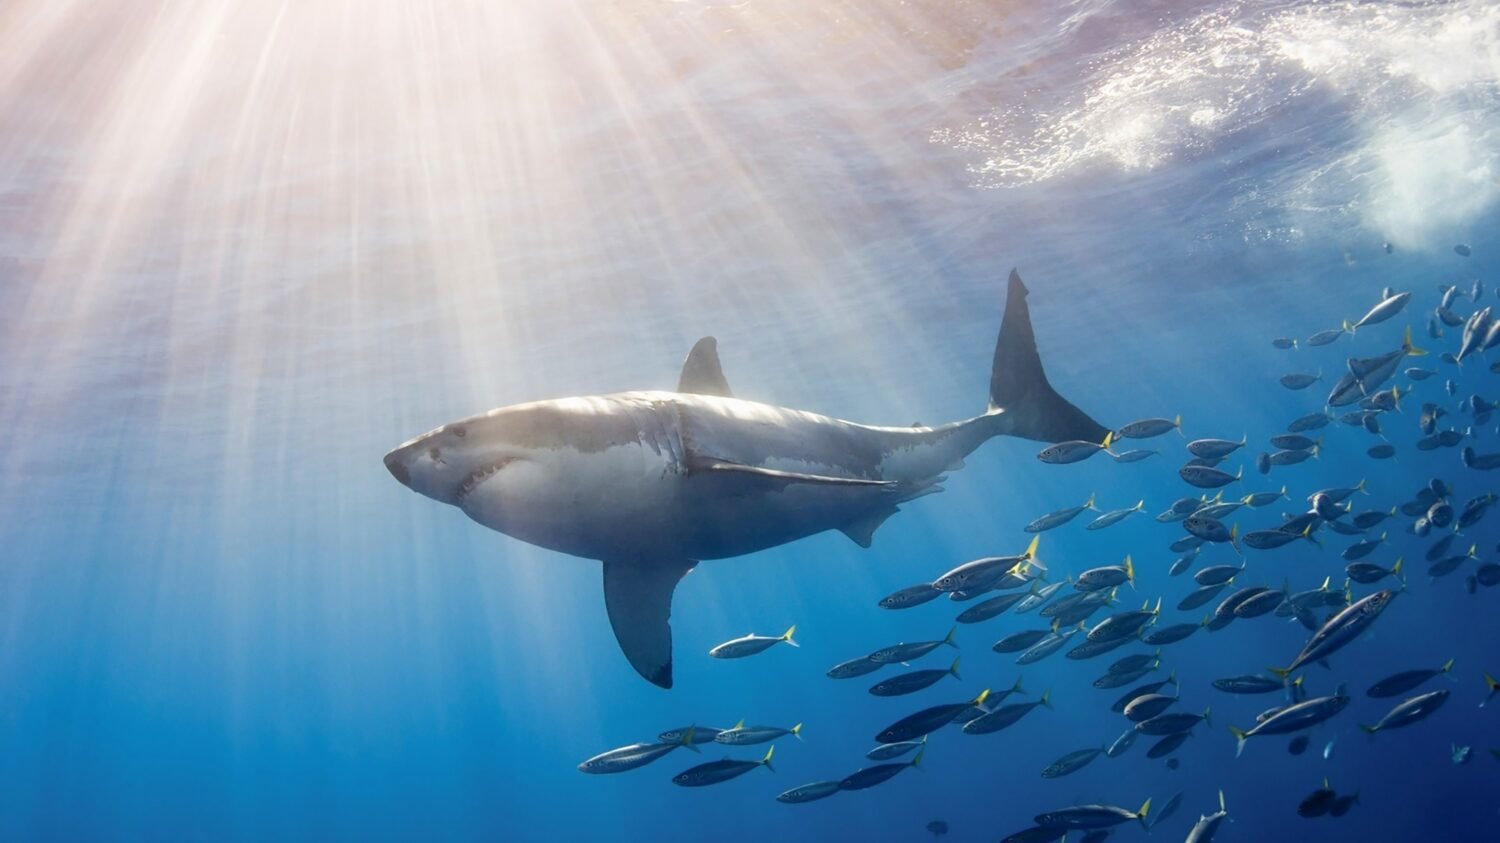 Great white shark at guadalupe island.